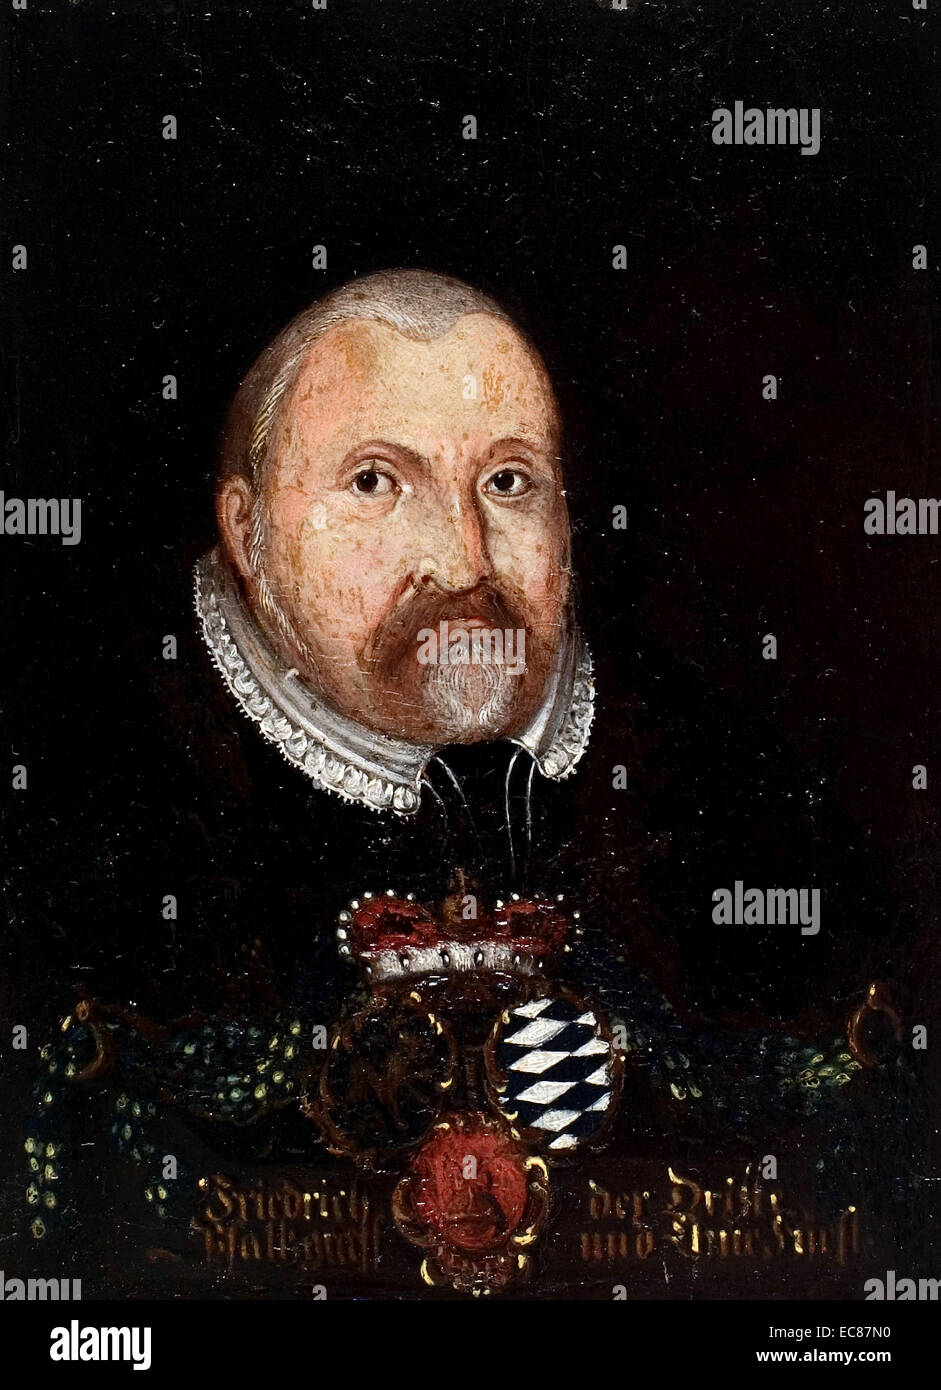 Portrait of Frederick III of Simmern, the Pious, Elector Palatine of the Rhine (1515-1576) ruler from the house of Whittelsbach, branch Palatinate-Simmern-Sponheim. Dated 16th Century Stock Photo